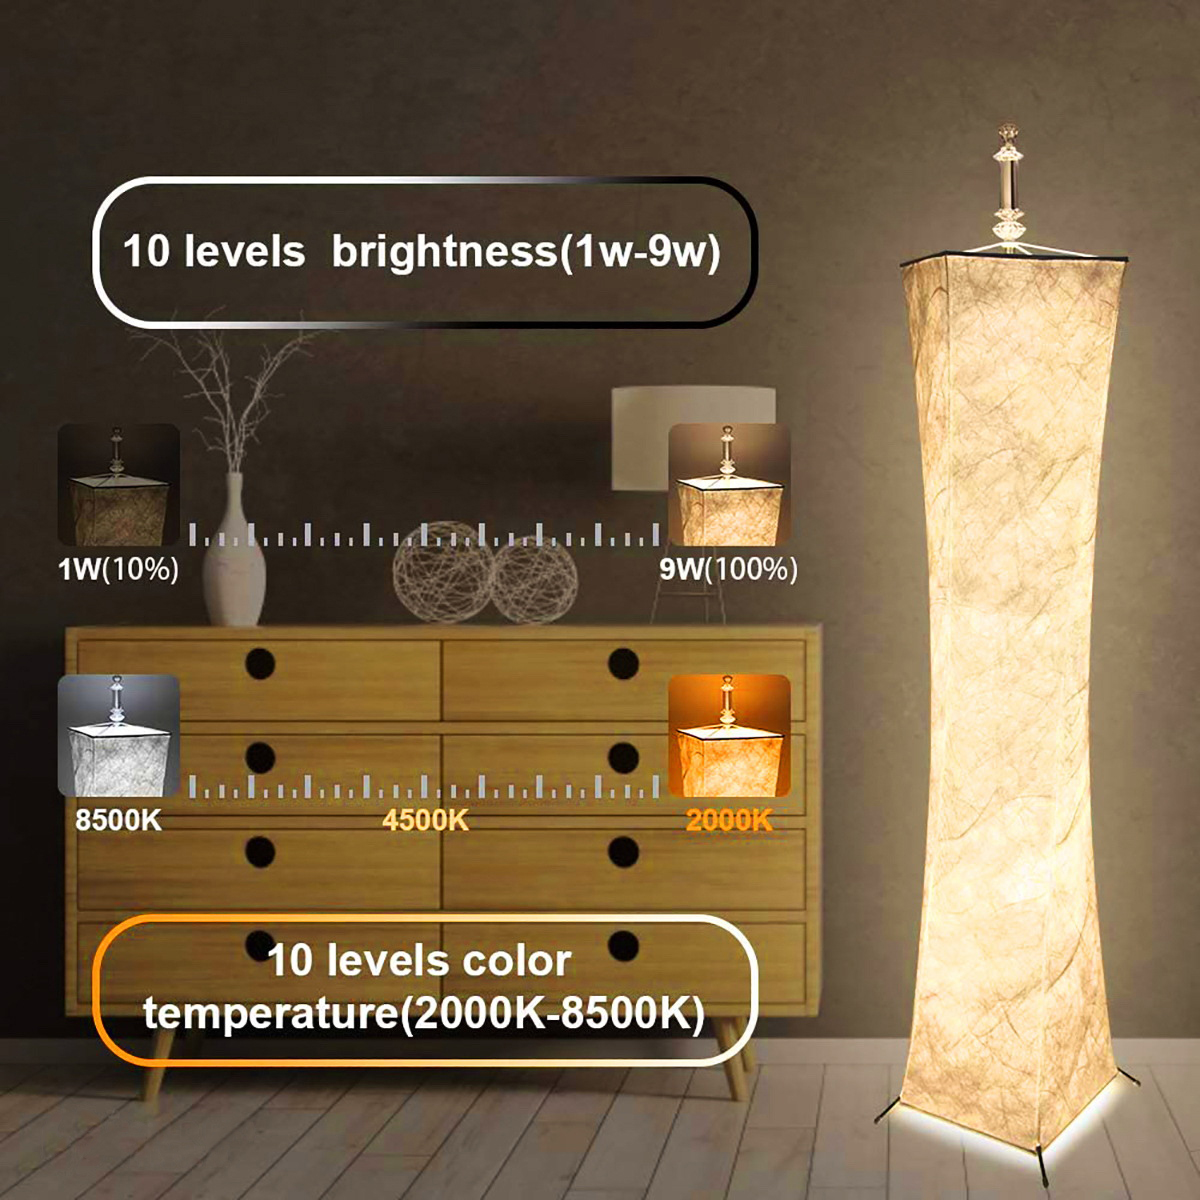 12V-LED-Floor-Lamp-Remote-Control-RGB-Color-Changing-58quot-Height-Bulbs-for-Livingroomish-1806500-7